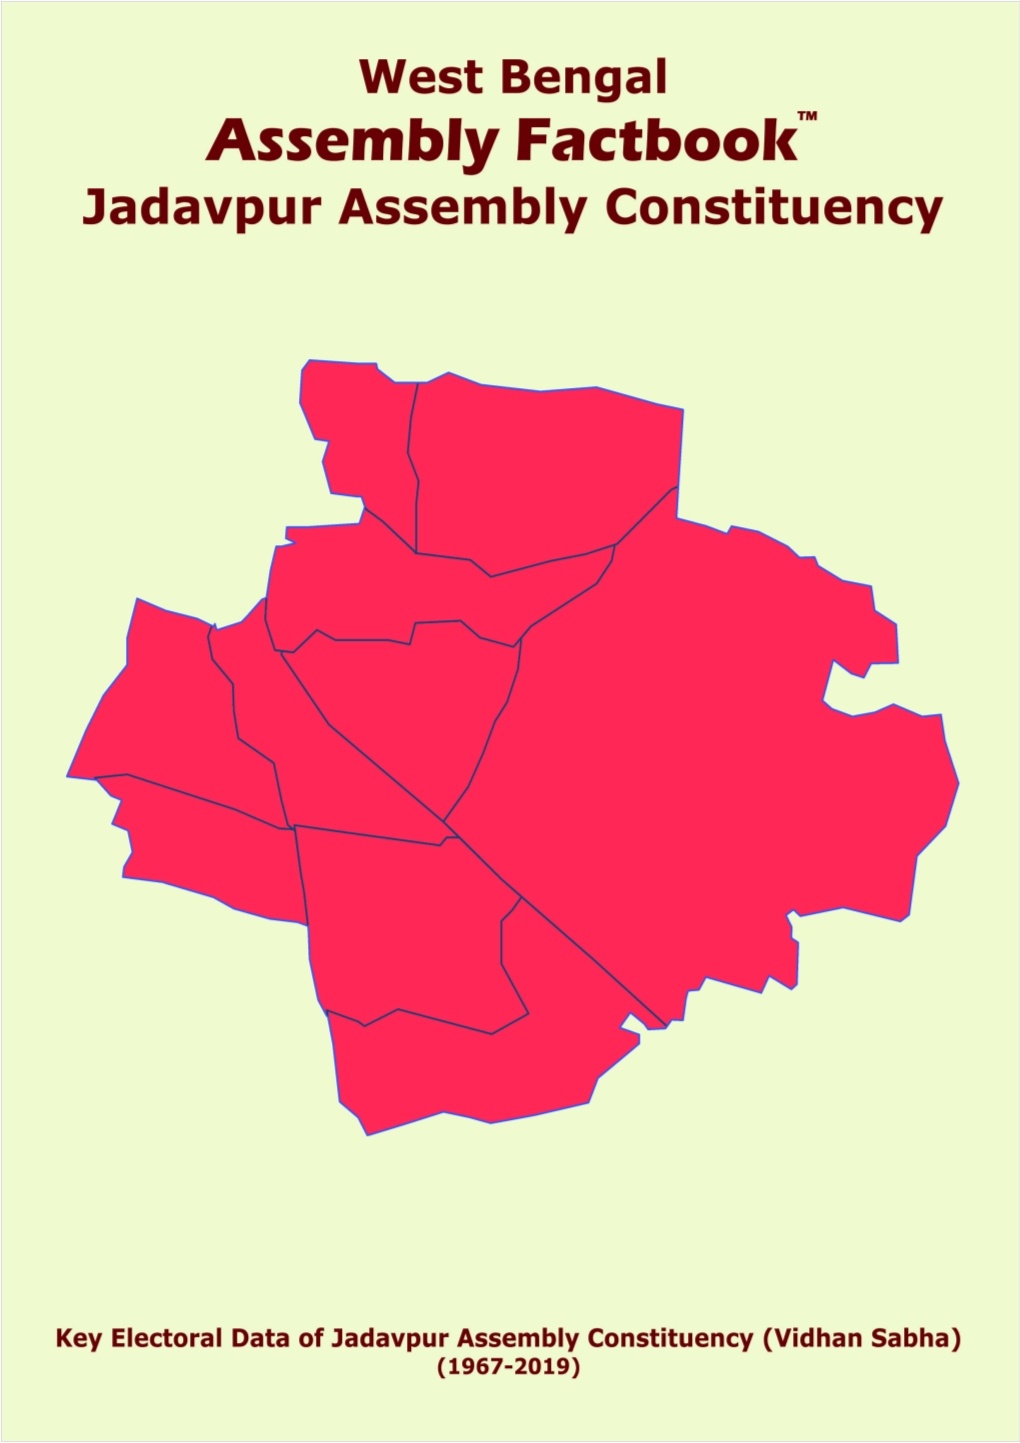 Key Electoral Data of Jadavpur Assembly Constituency